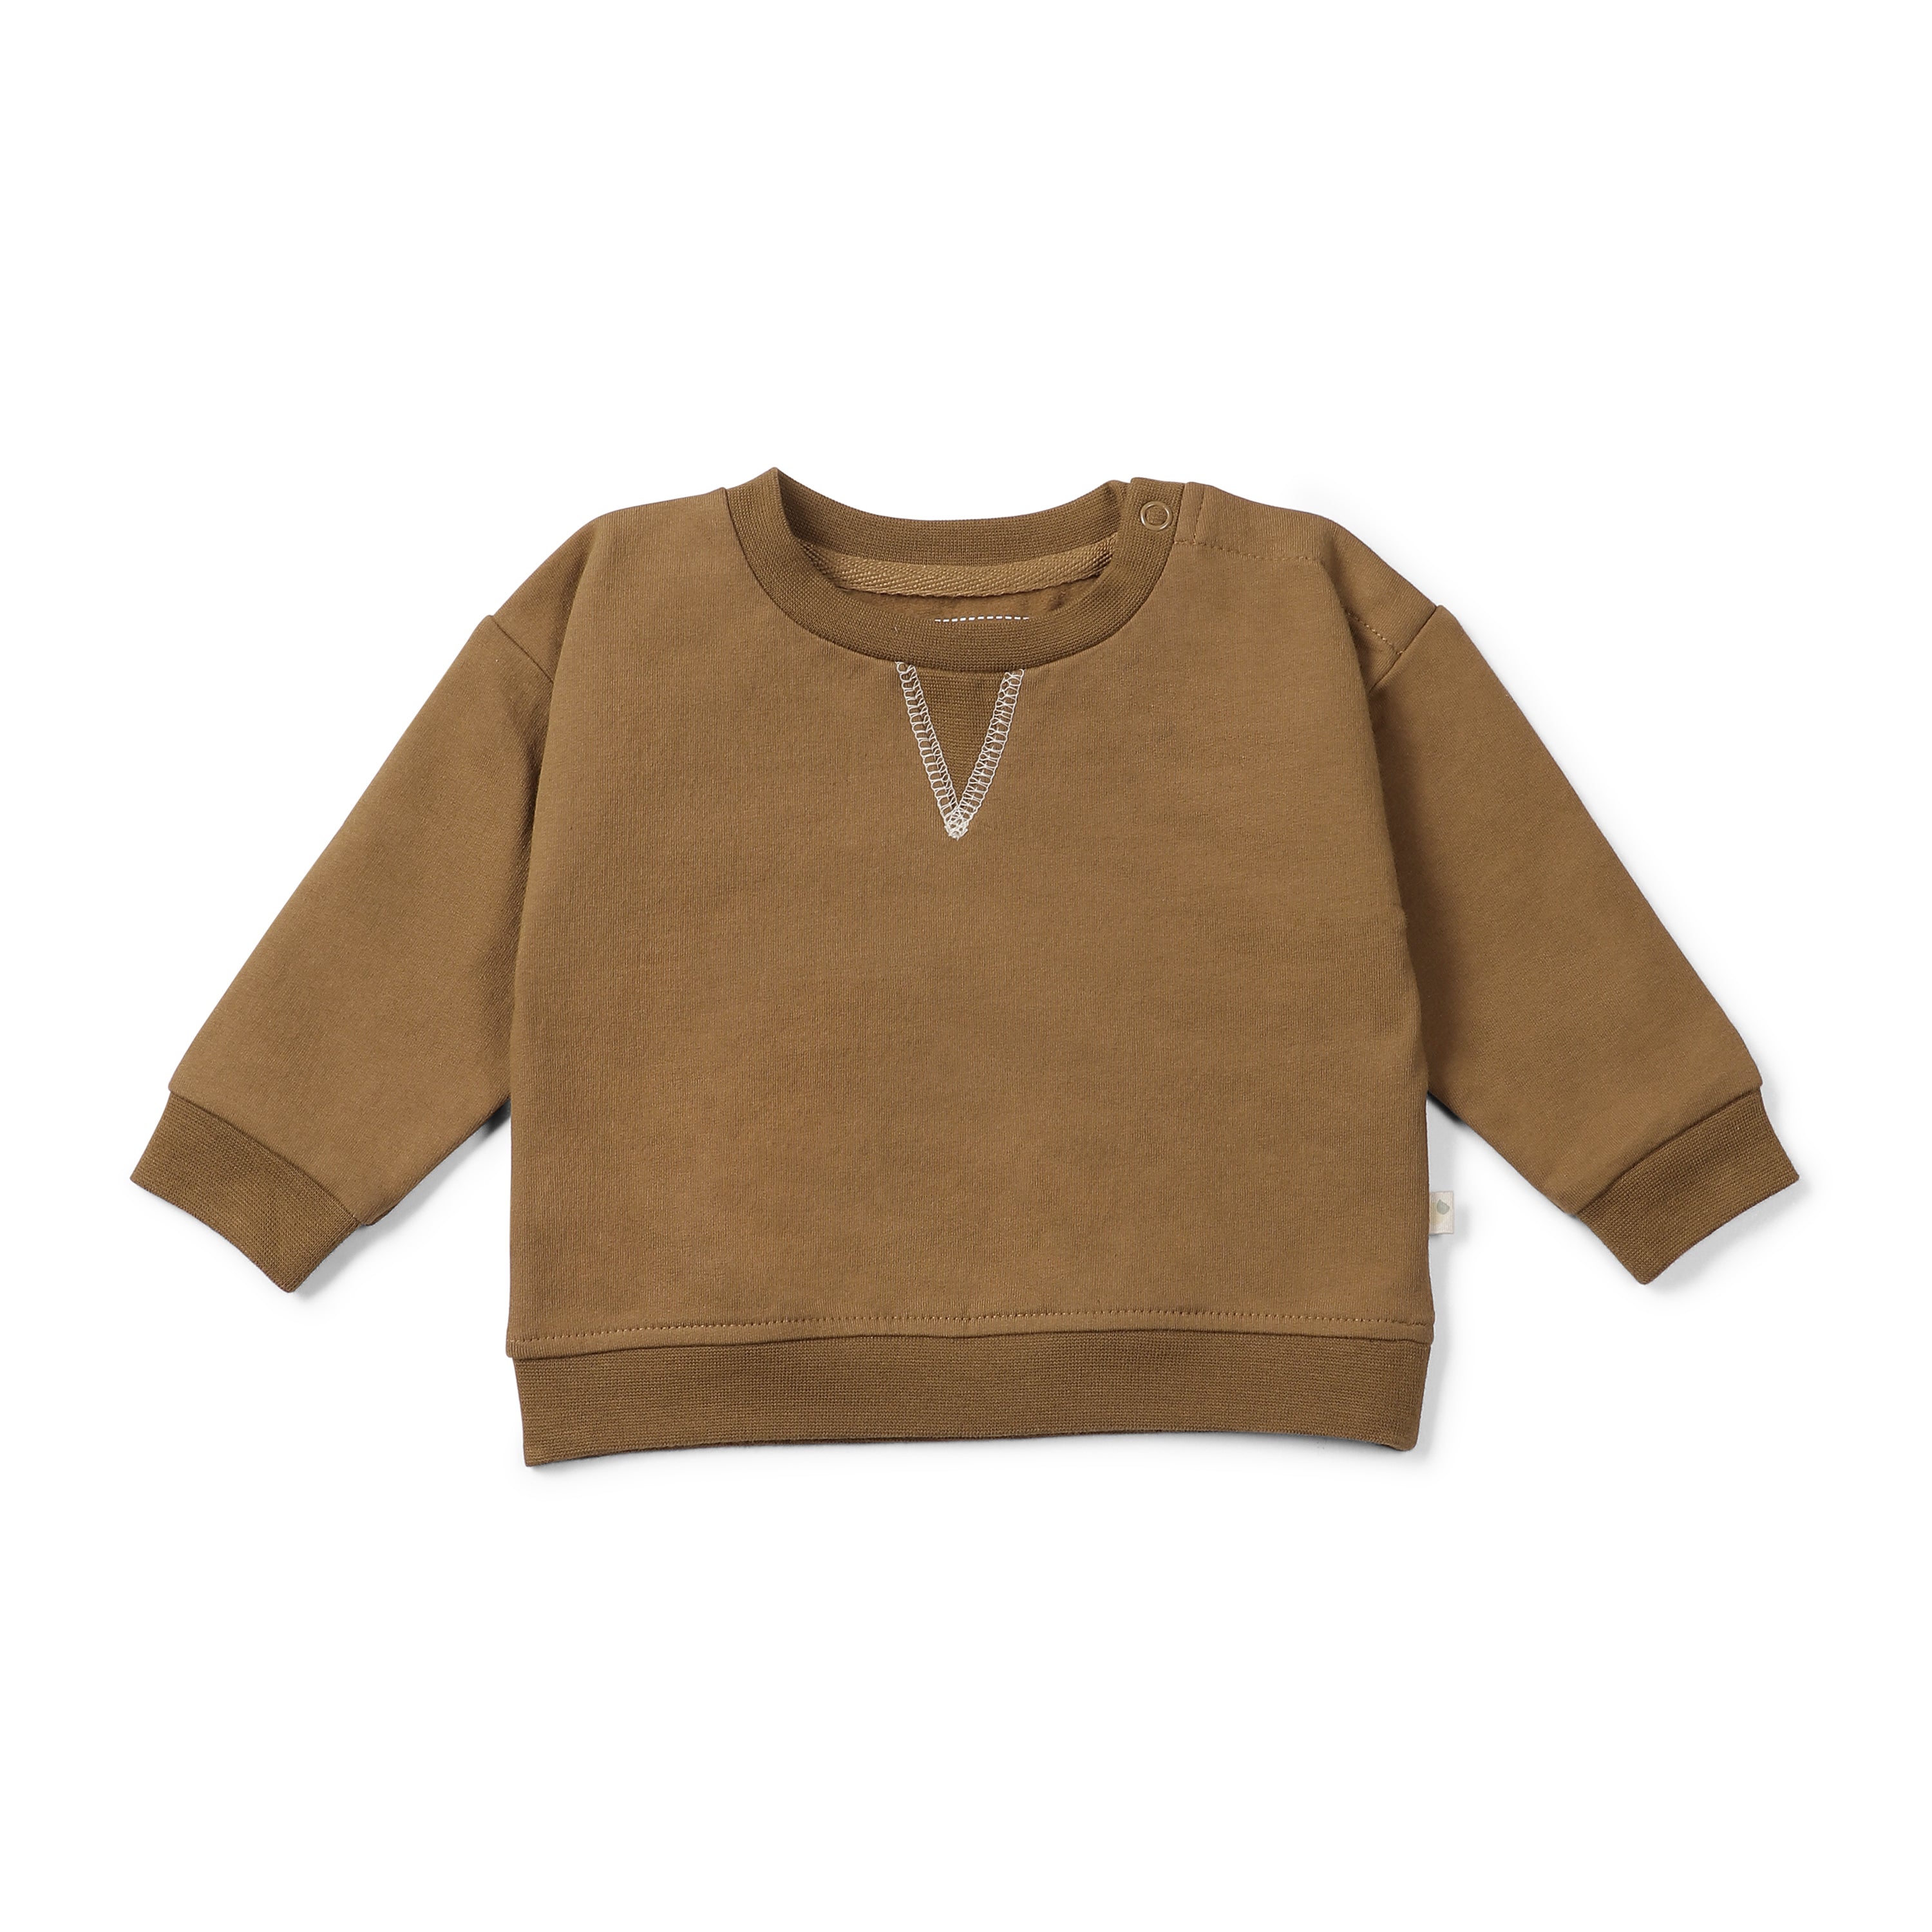 A brown Organic Kids toddler sweatshirt in Walnut Solid with long sleeves and two buttons at the shoulder, displayed on a plain white background.